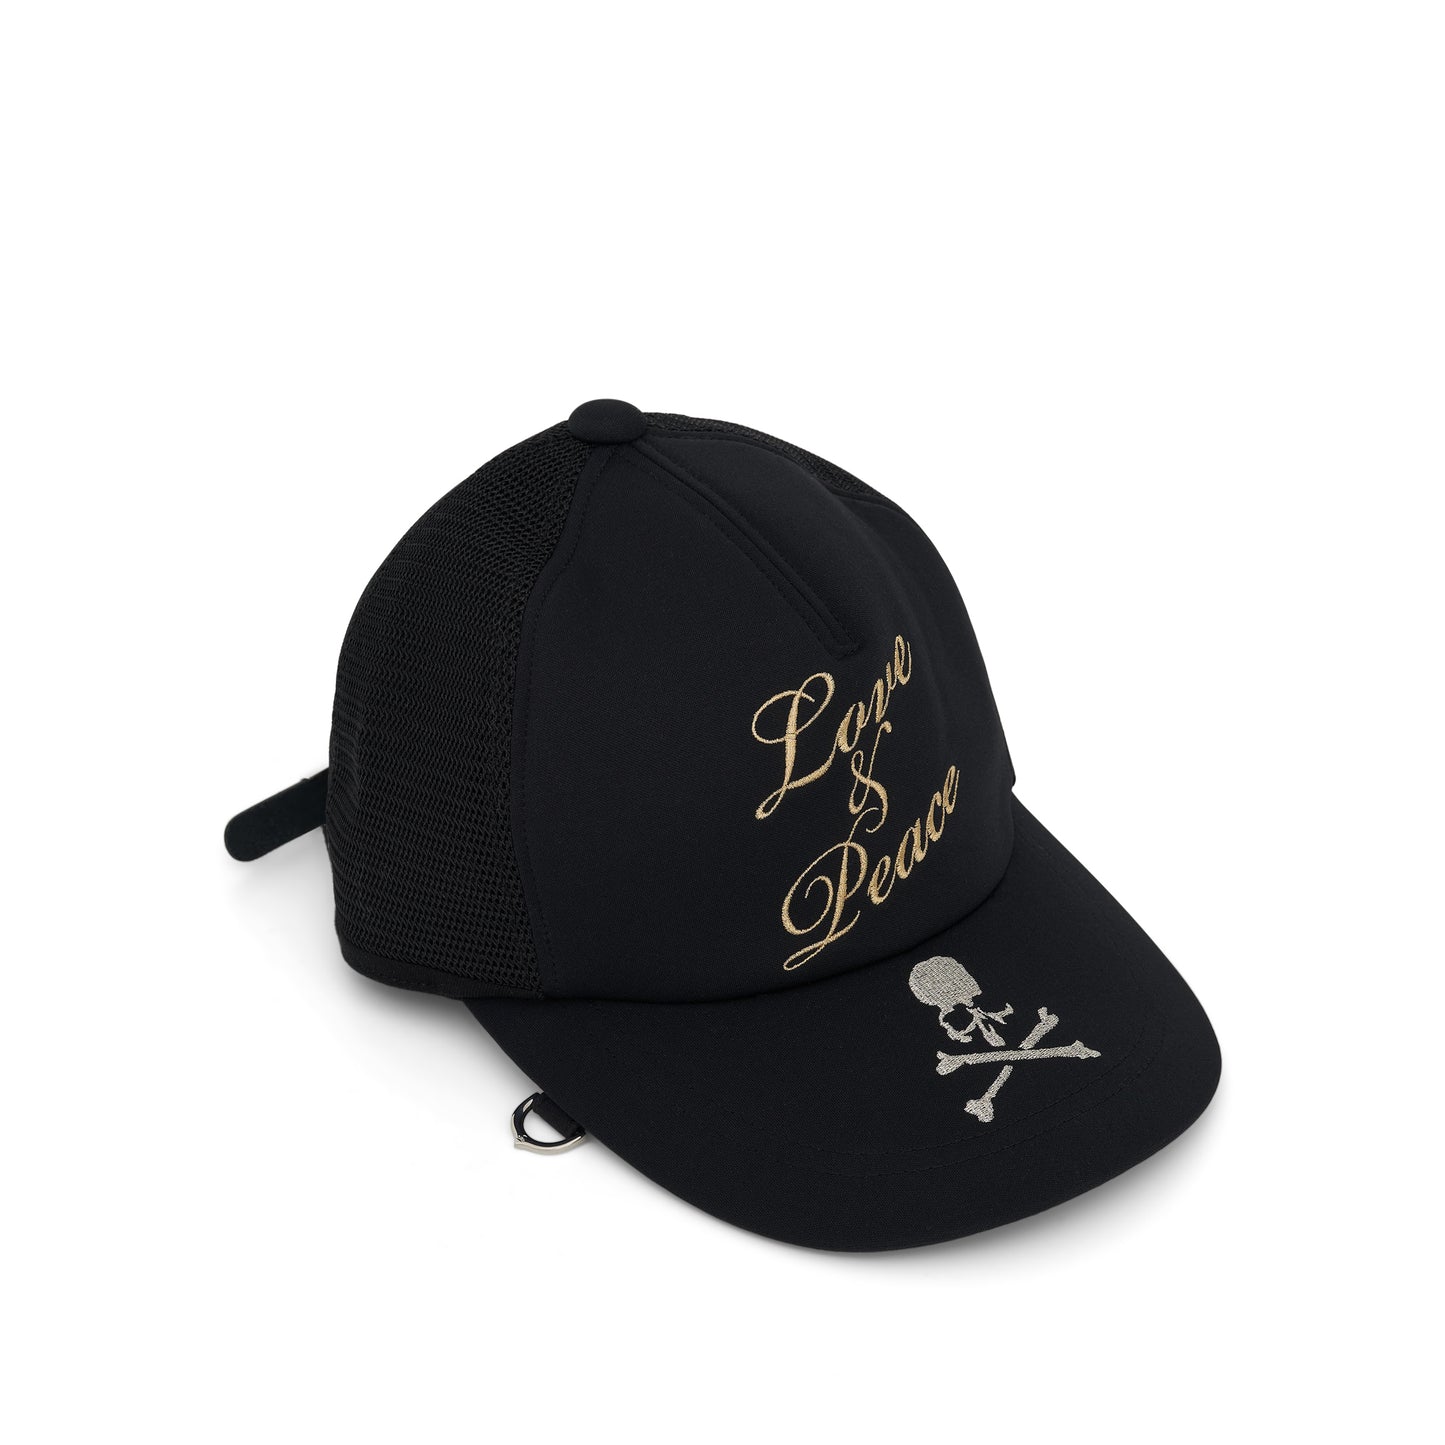 Embroidered Trucker Cap in Black